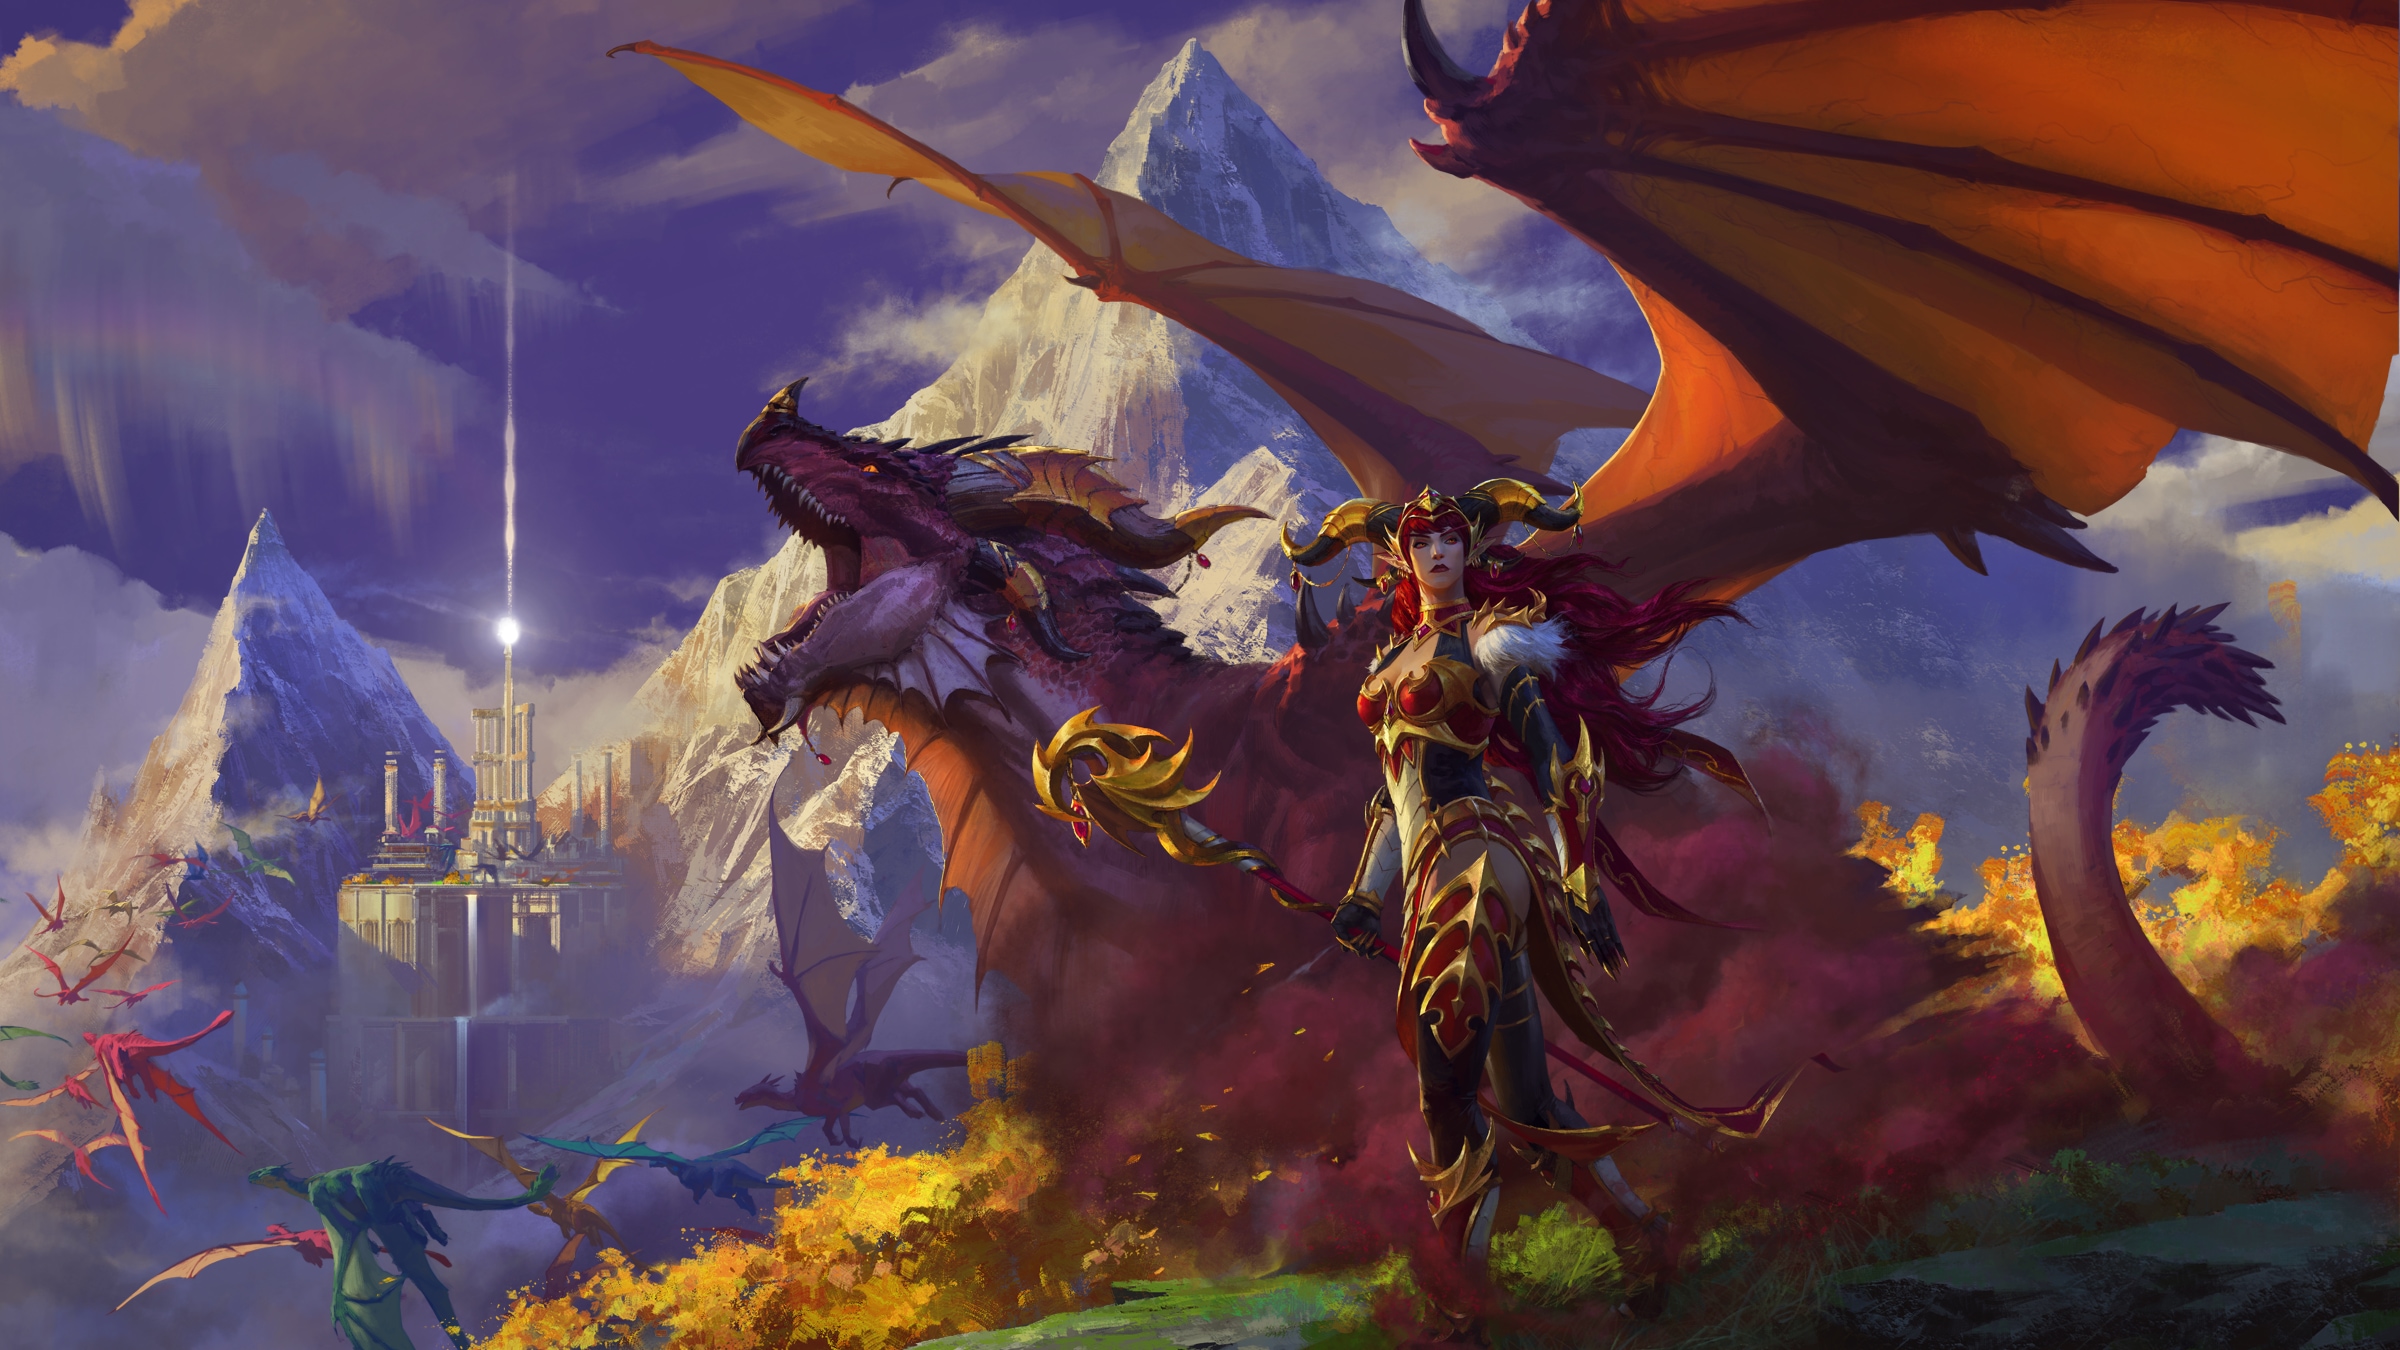 Shout Out Your Dragonflight Adventures During Our Contest!